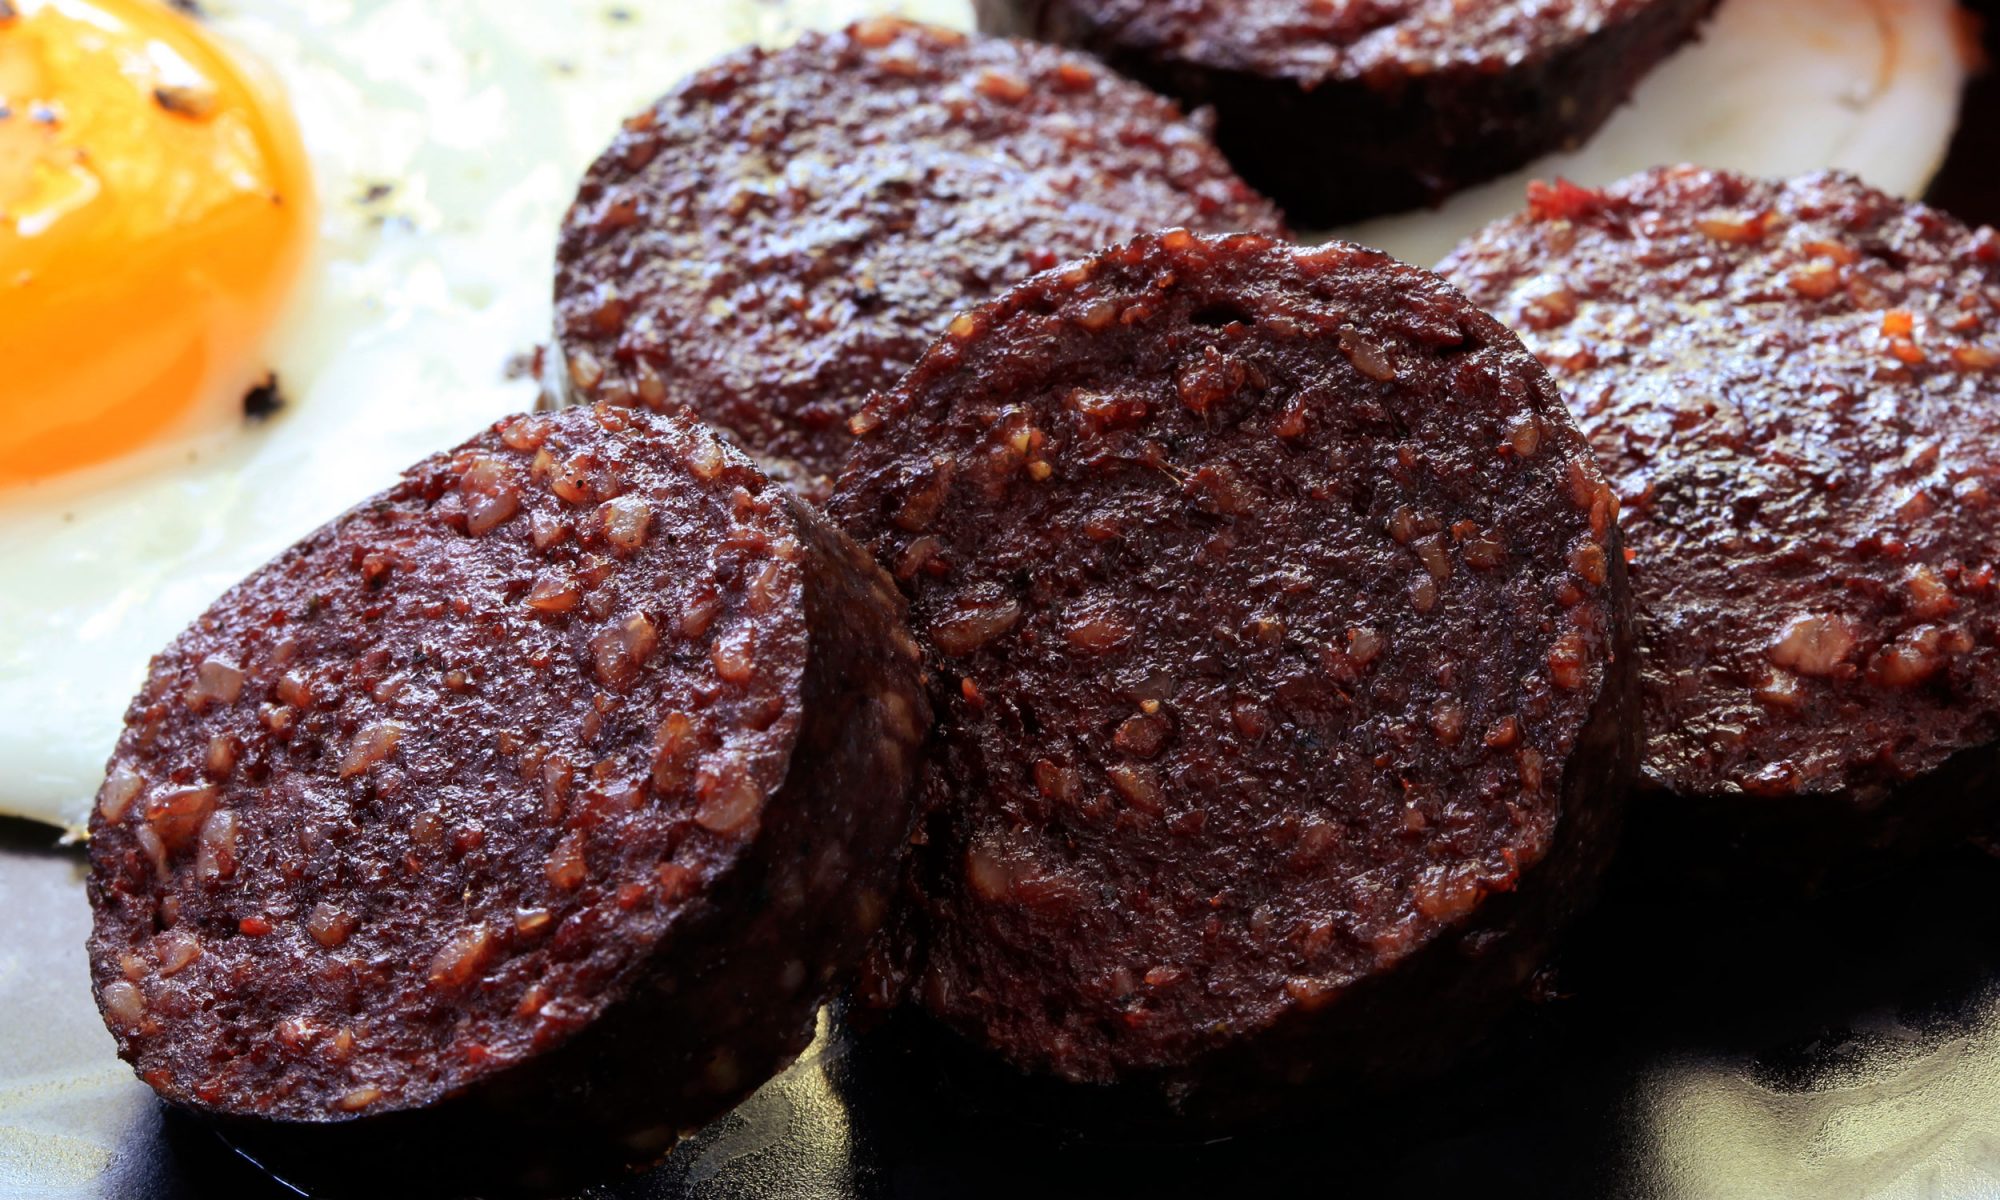 EC: 5 People from the United Kingdom Try to Explain Black Pudding